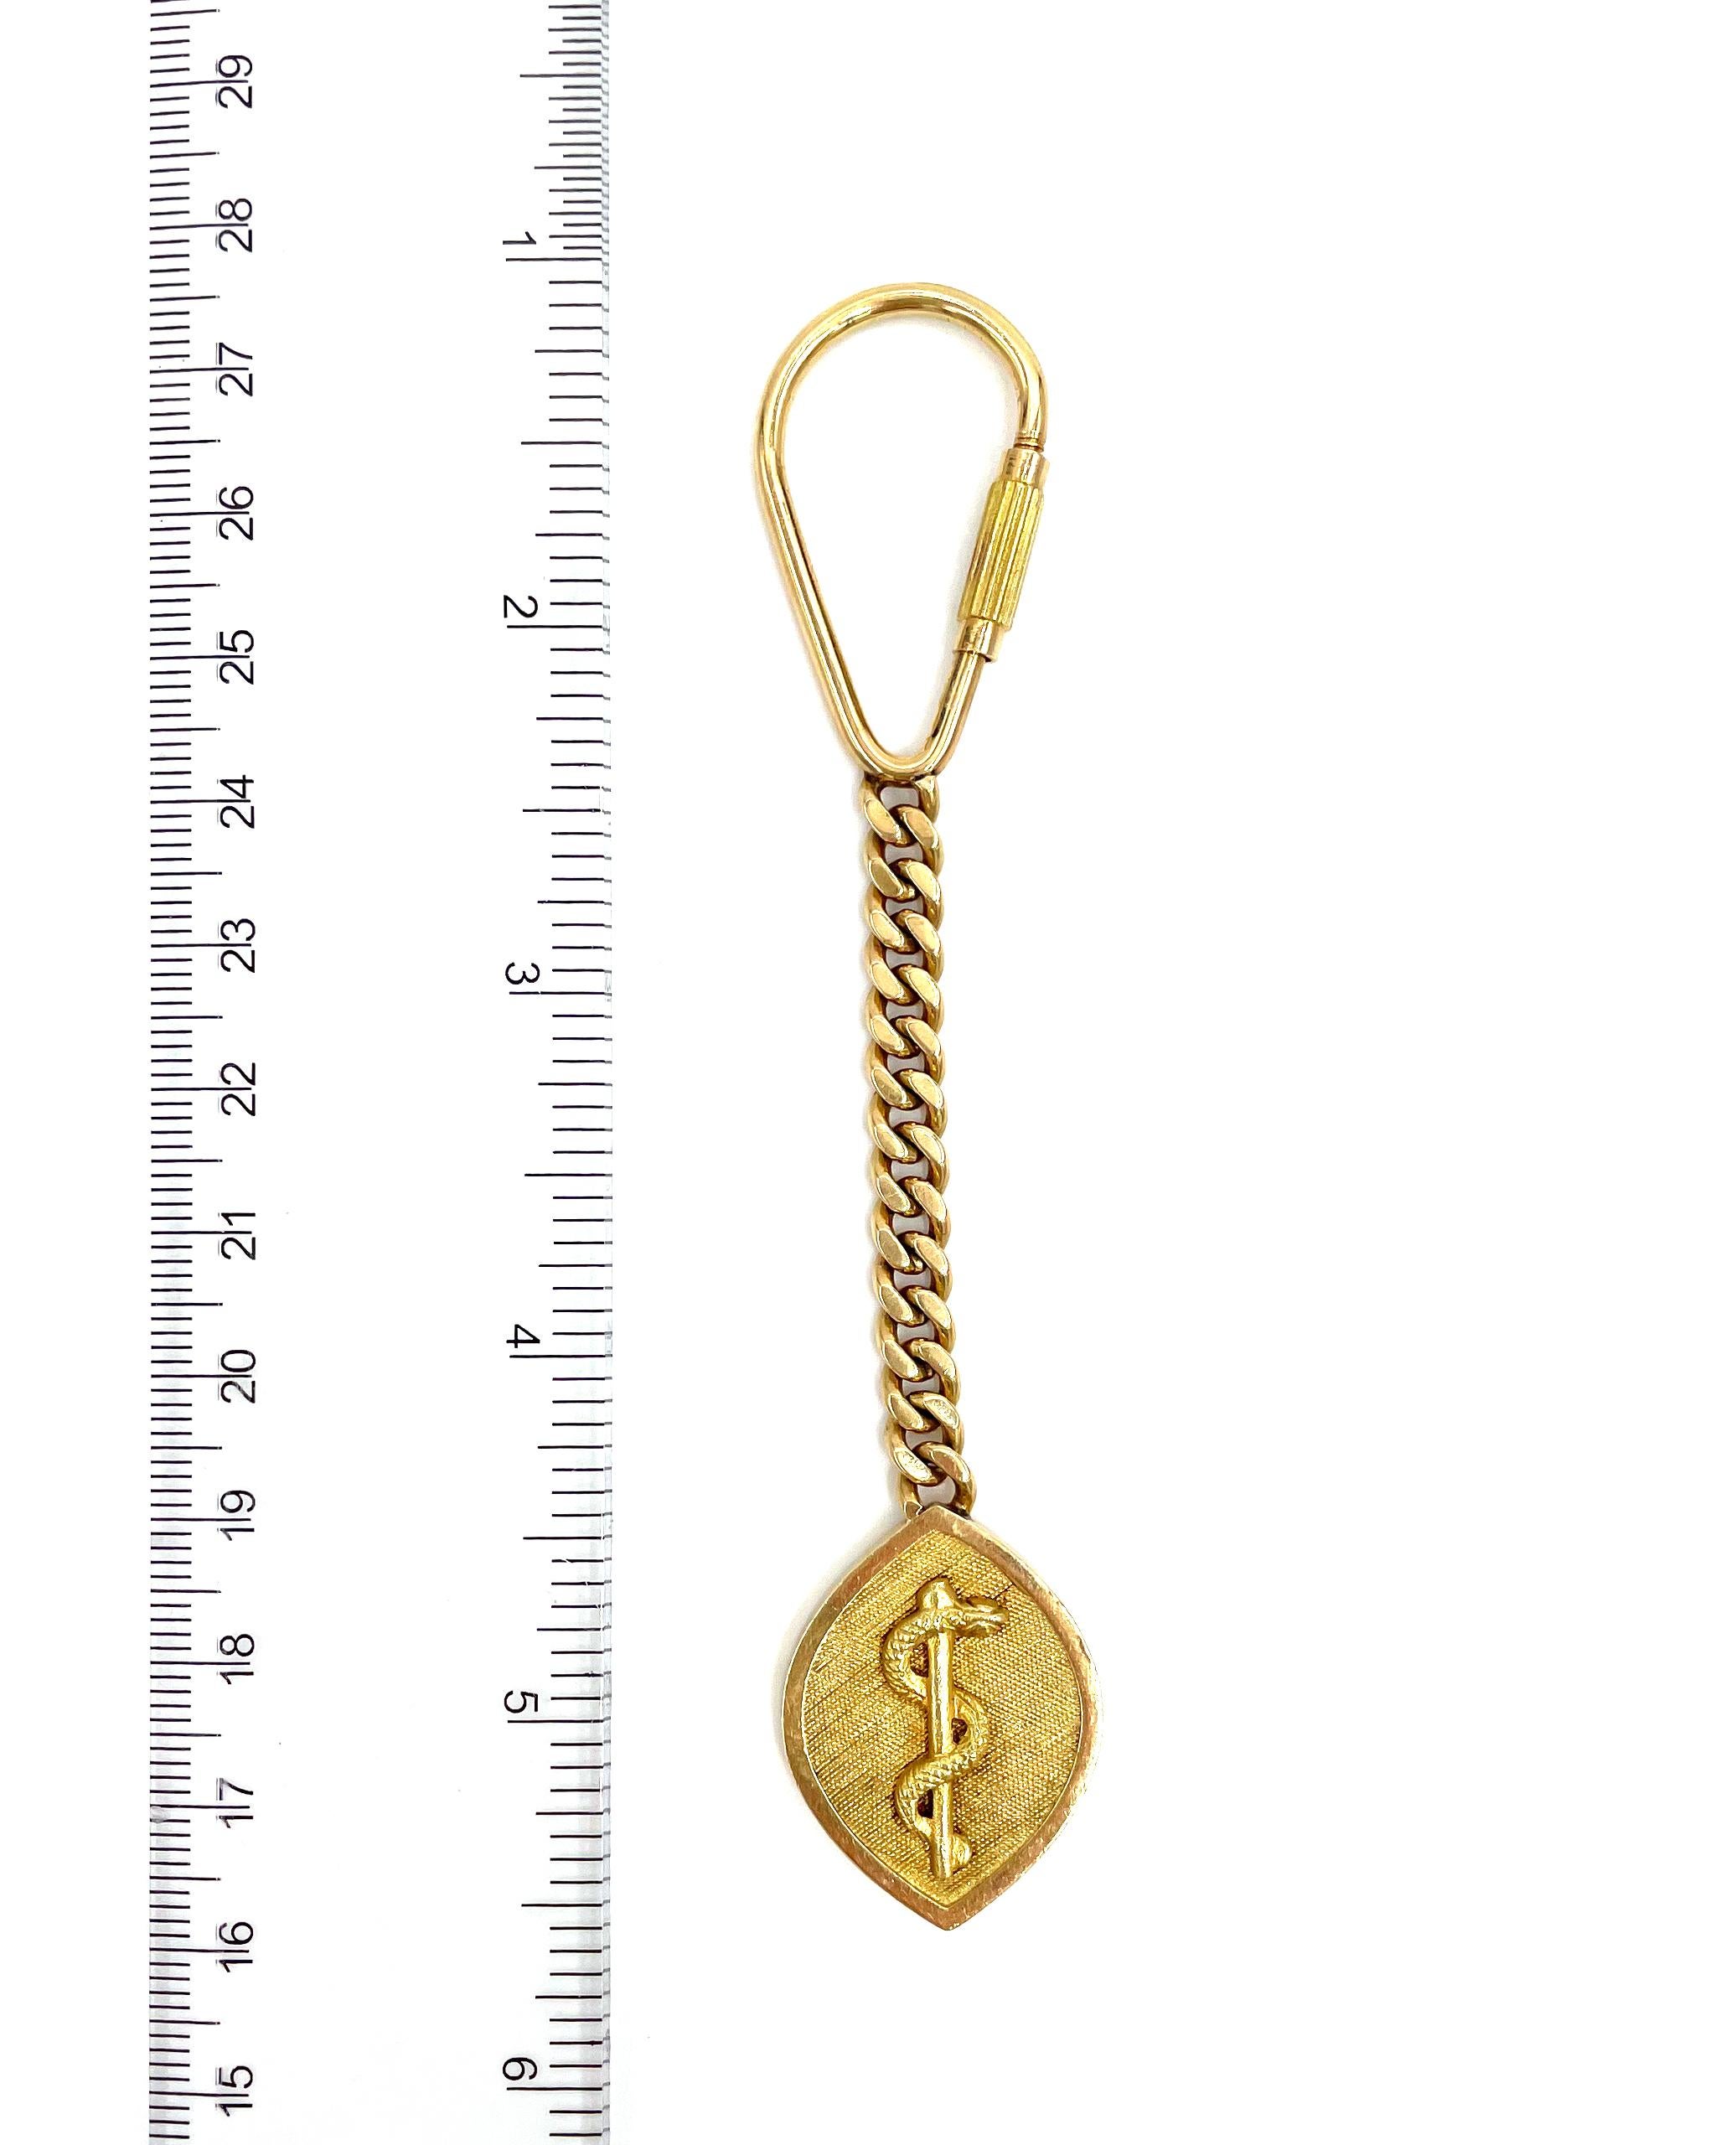 Preowned 14K yellow gold key chain with the Rod of Asclepius.

* Weight: 20 grams